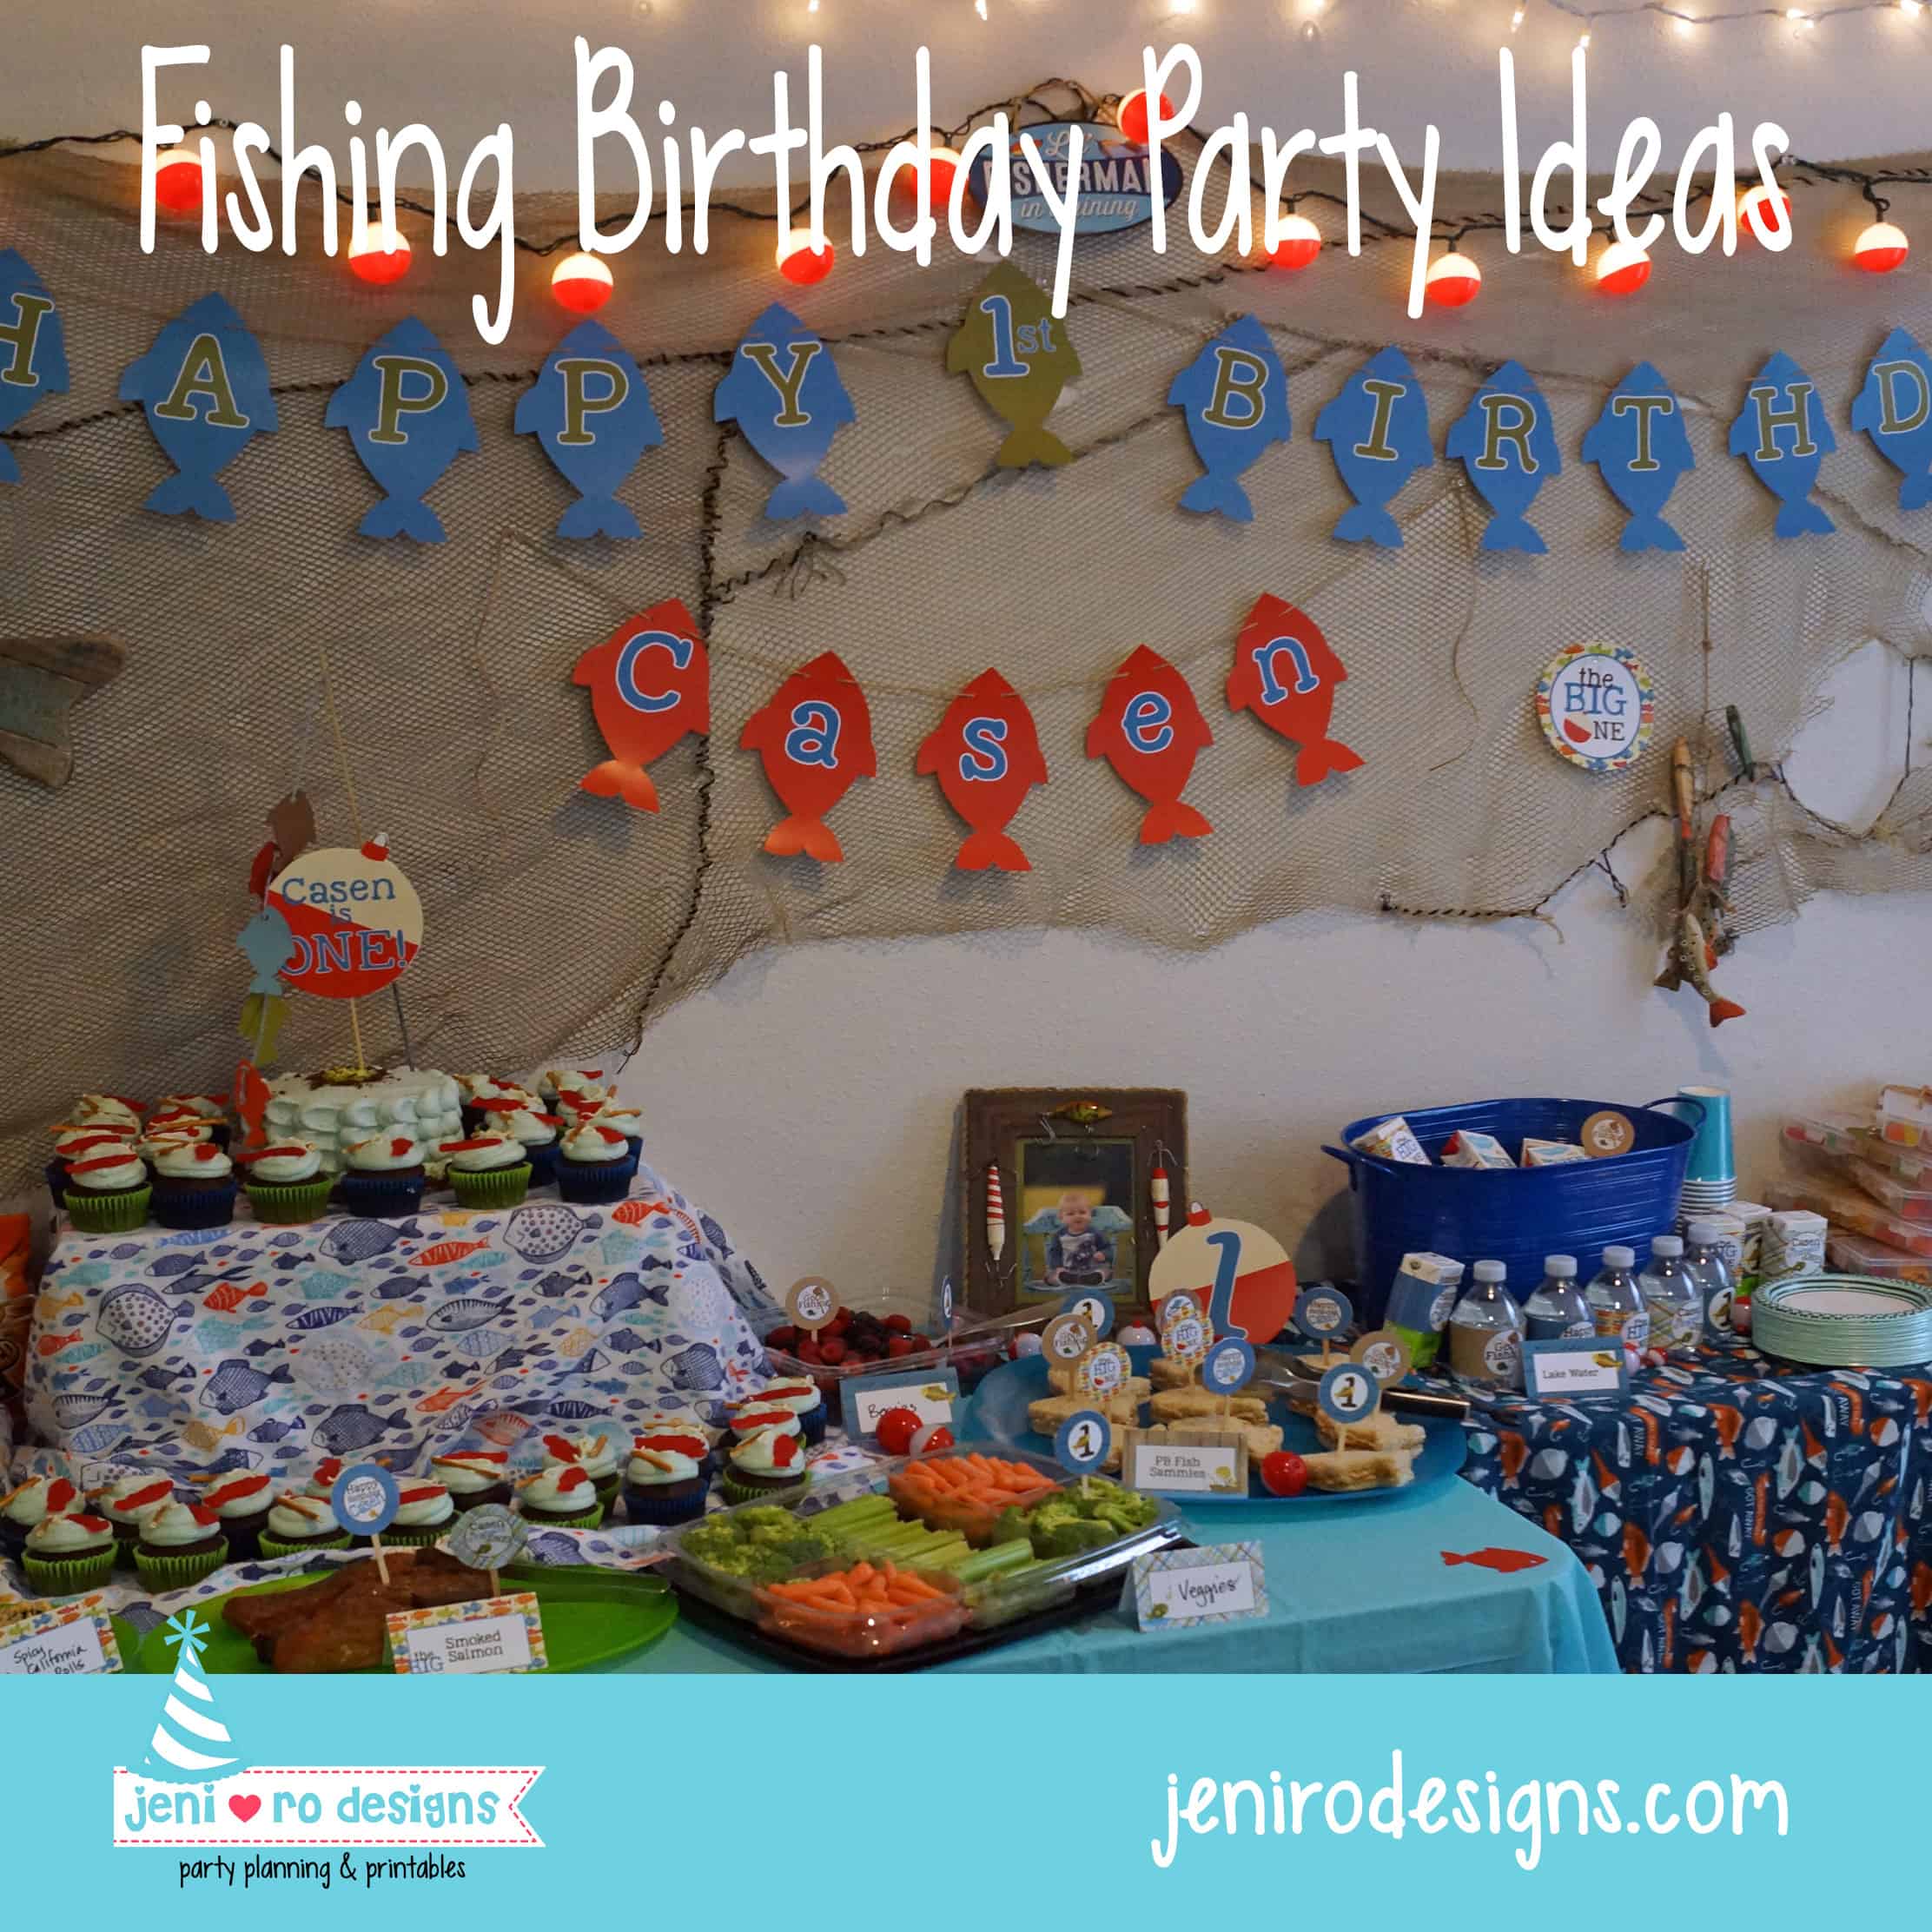 Fishing birthday party ideas for your little angler's next birthday  celebration!